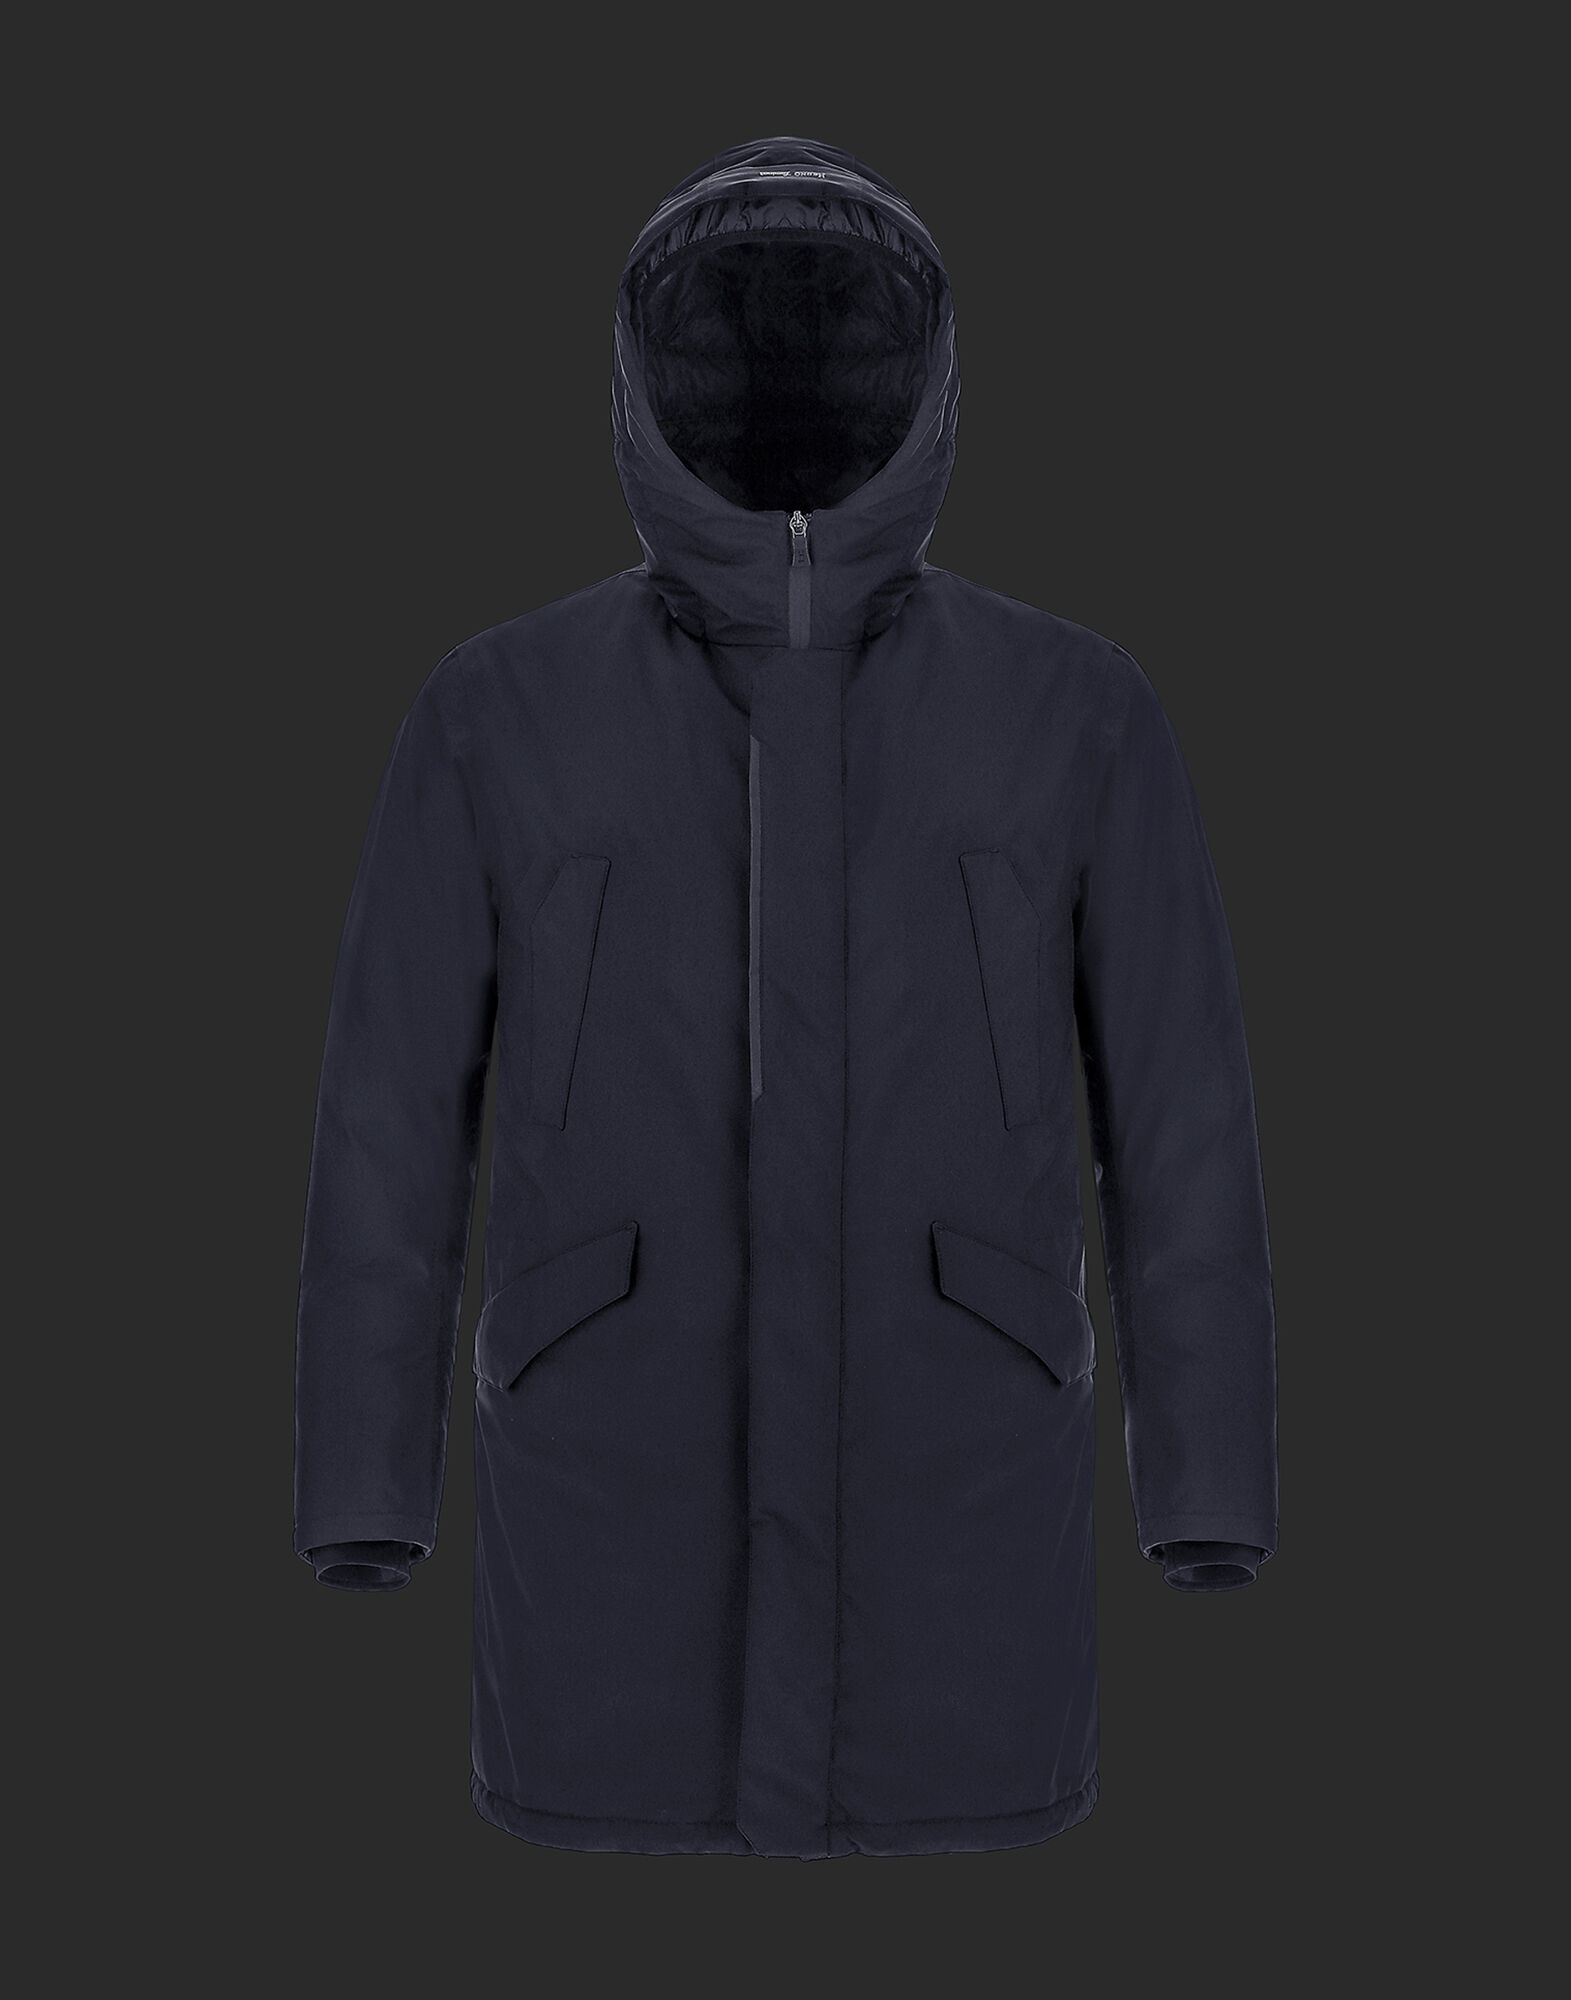 LAMINAR GORE-TEX 2LAYER PARKA in Blue for Men | Herno®